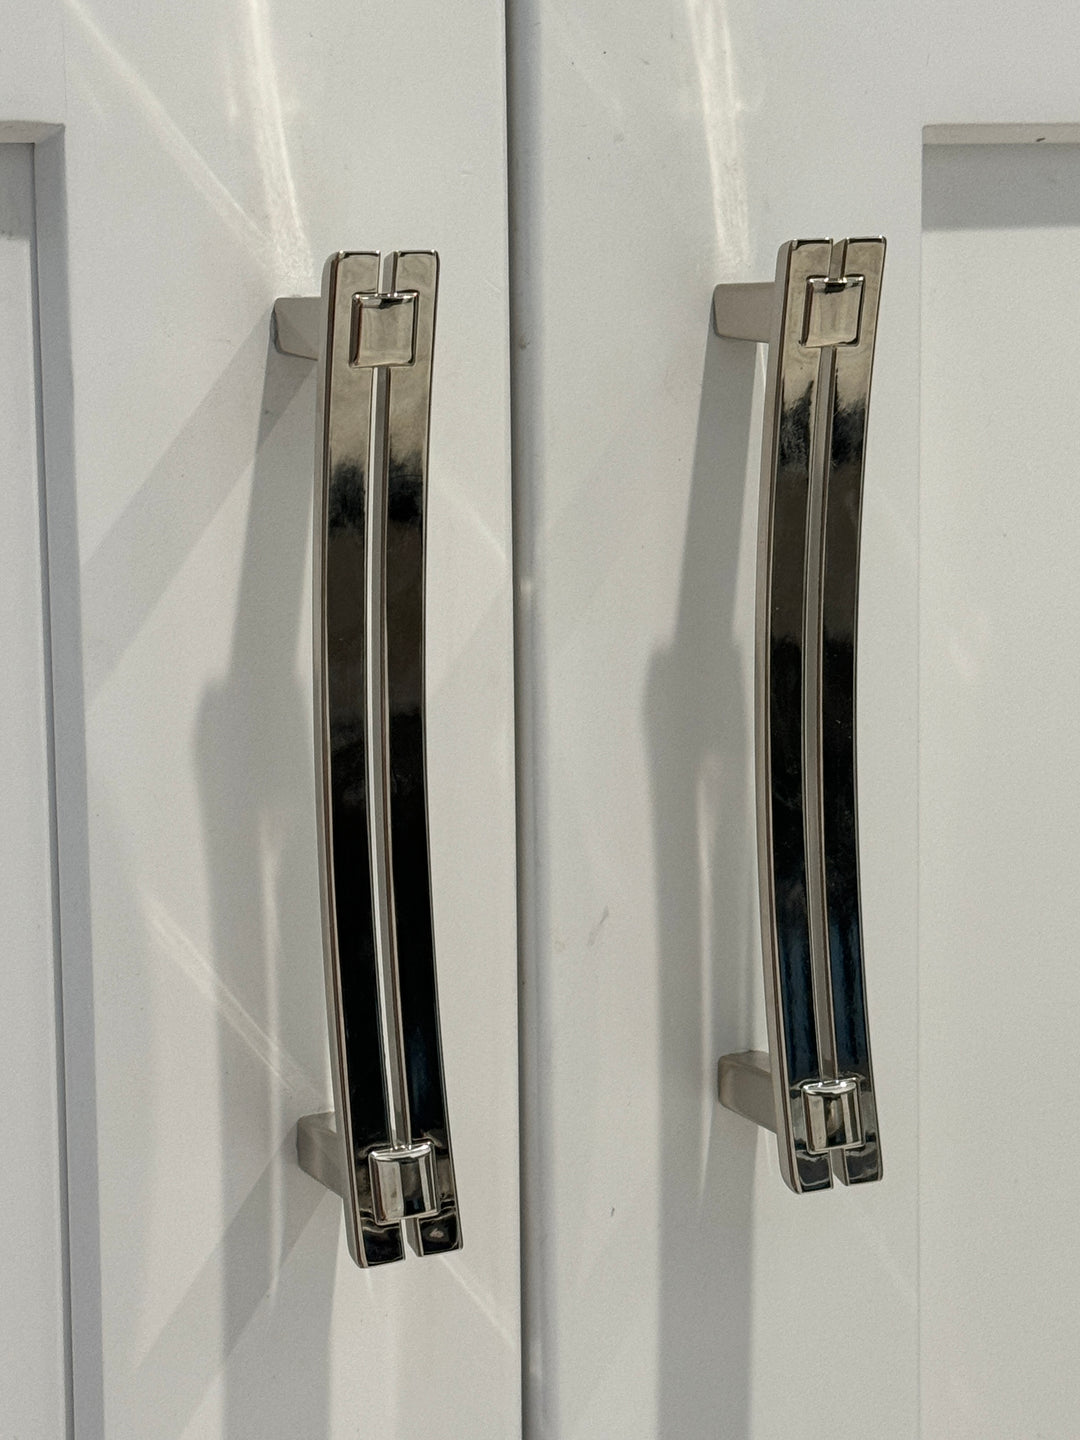 Polished Nickel "Ori" Cabinet Knobs and Pull - Purdy Hardware - 